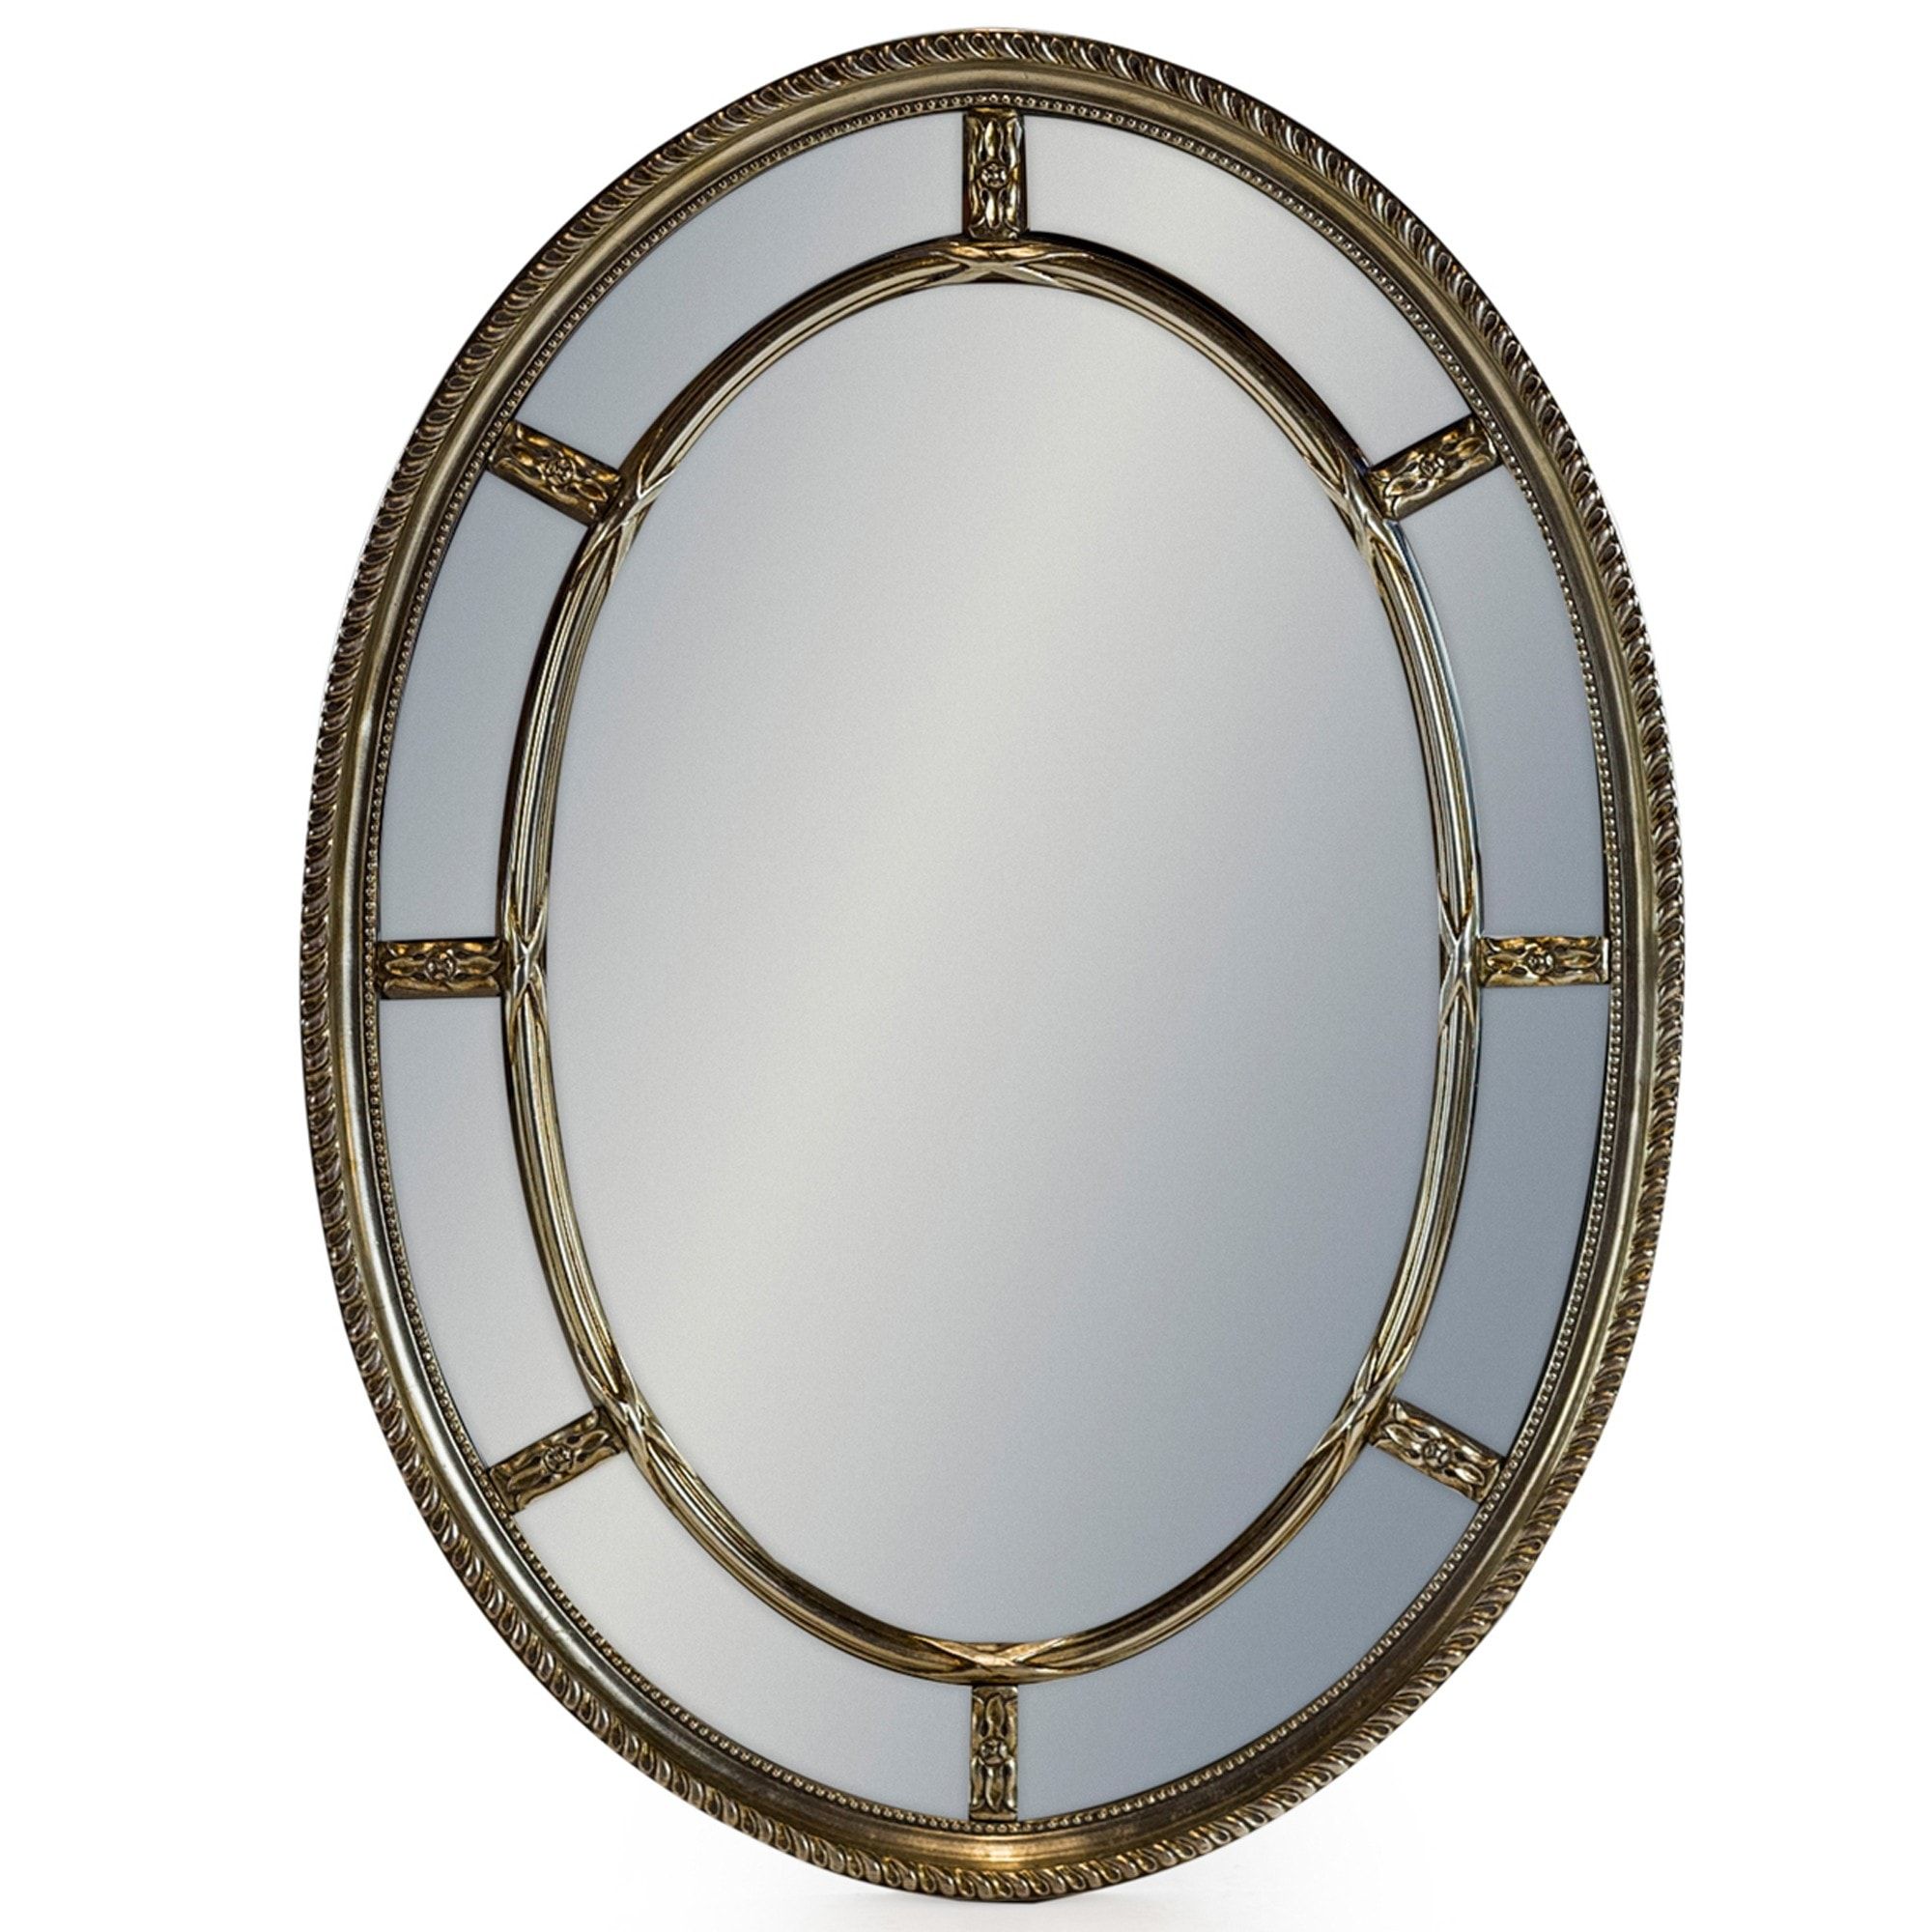 Silver Antique French Style Oval Multi Mirror | Decorative Silver With Antiqued Silver Quatrefoil Wall Mirrors (View 2 of 15)